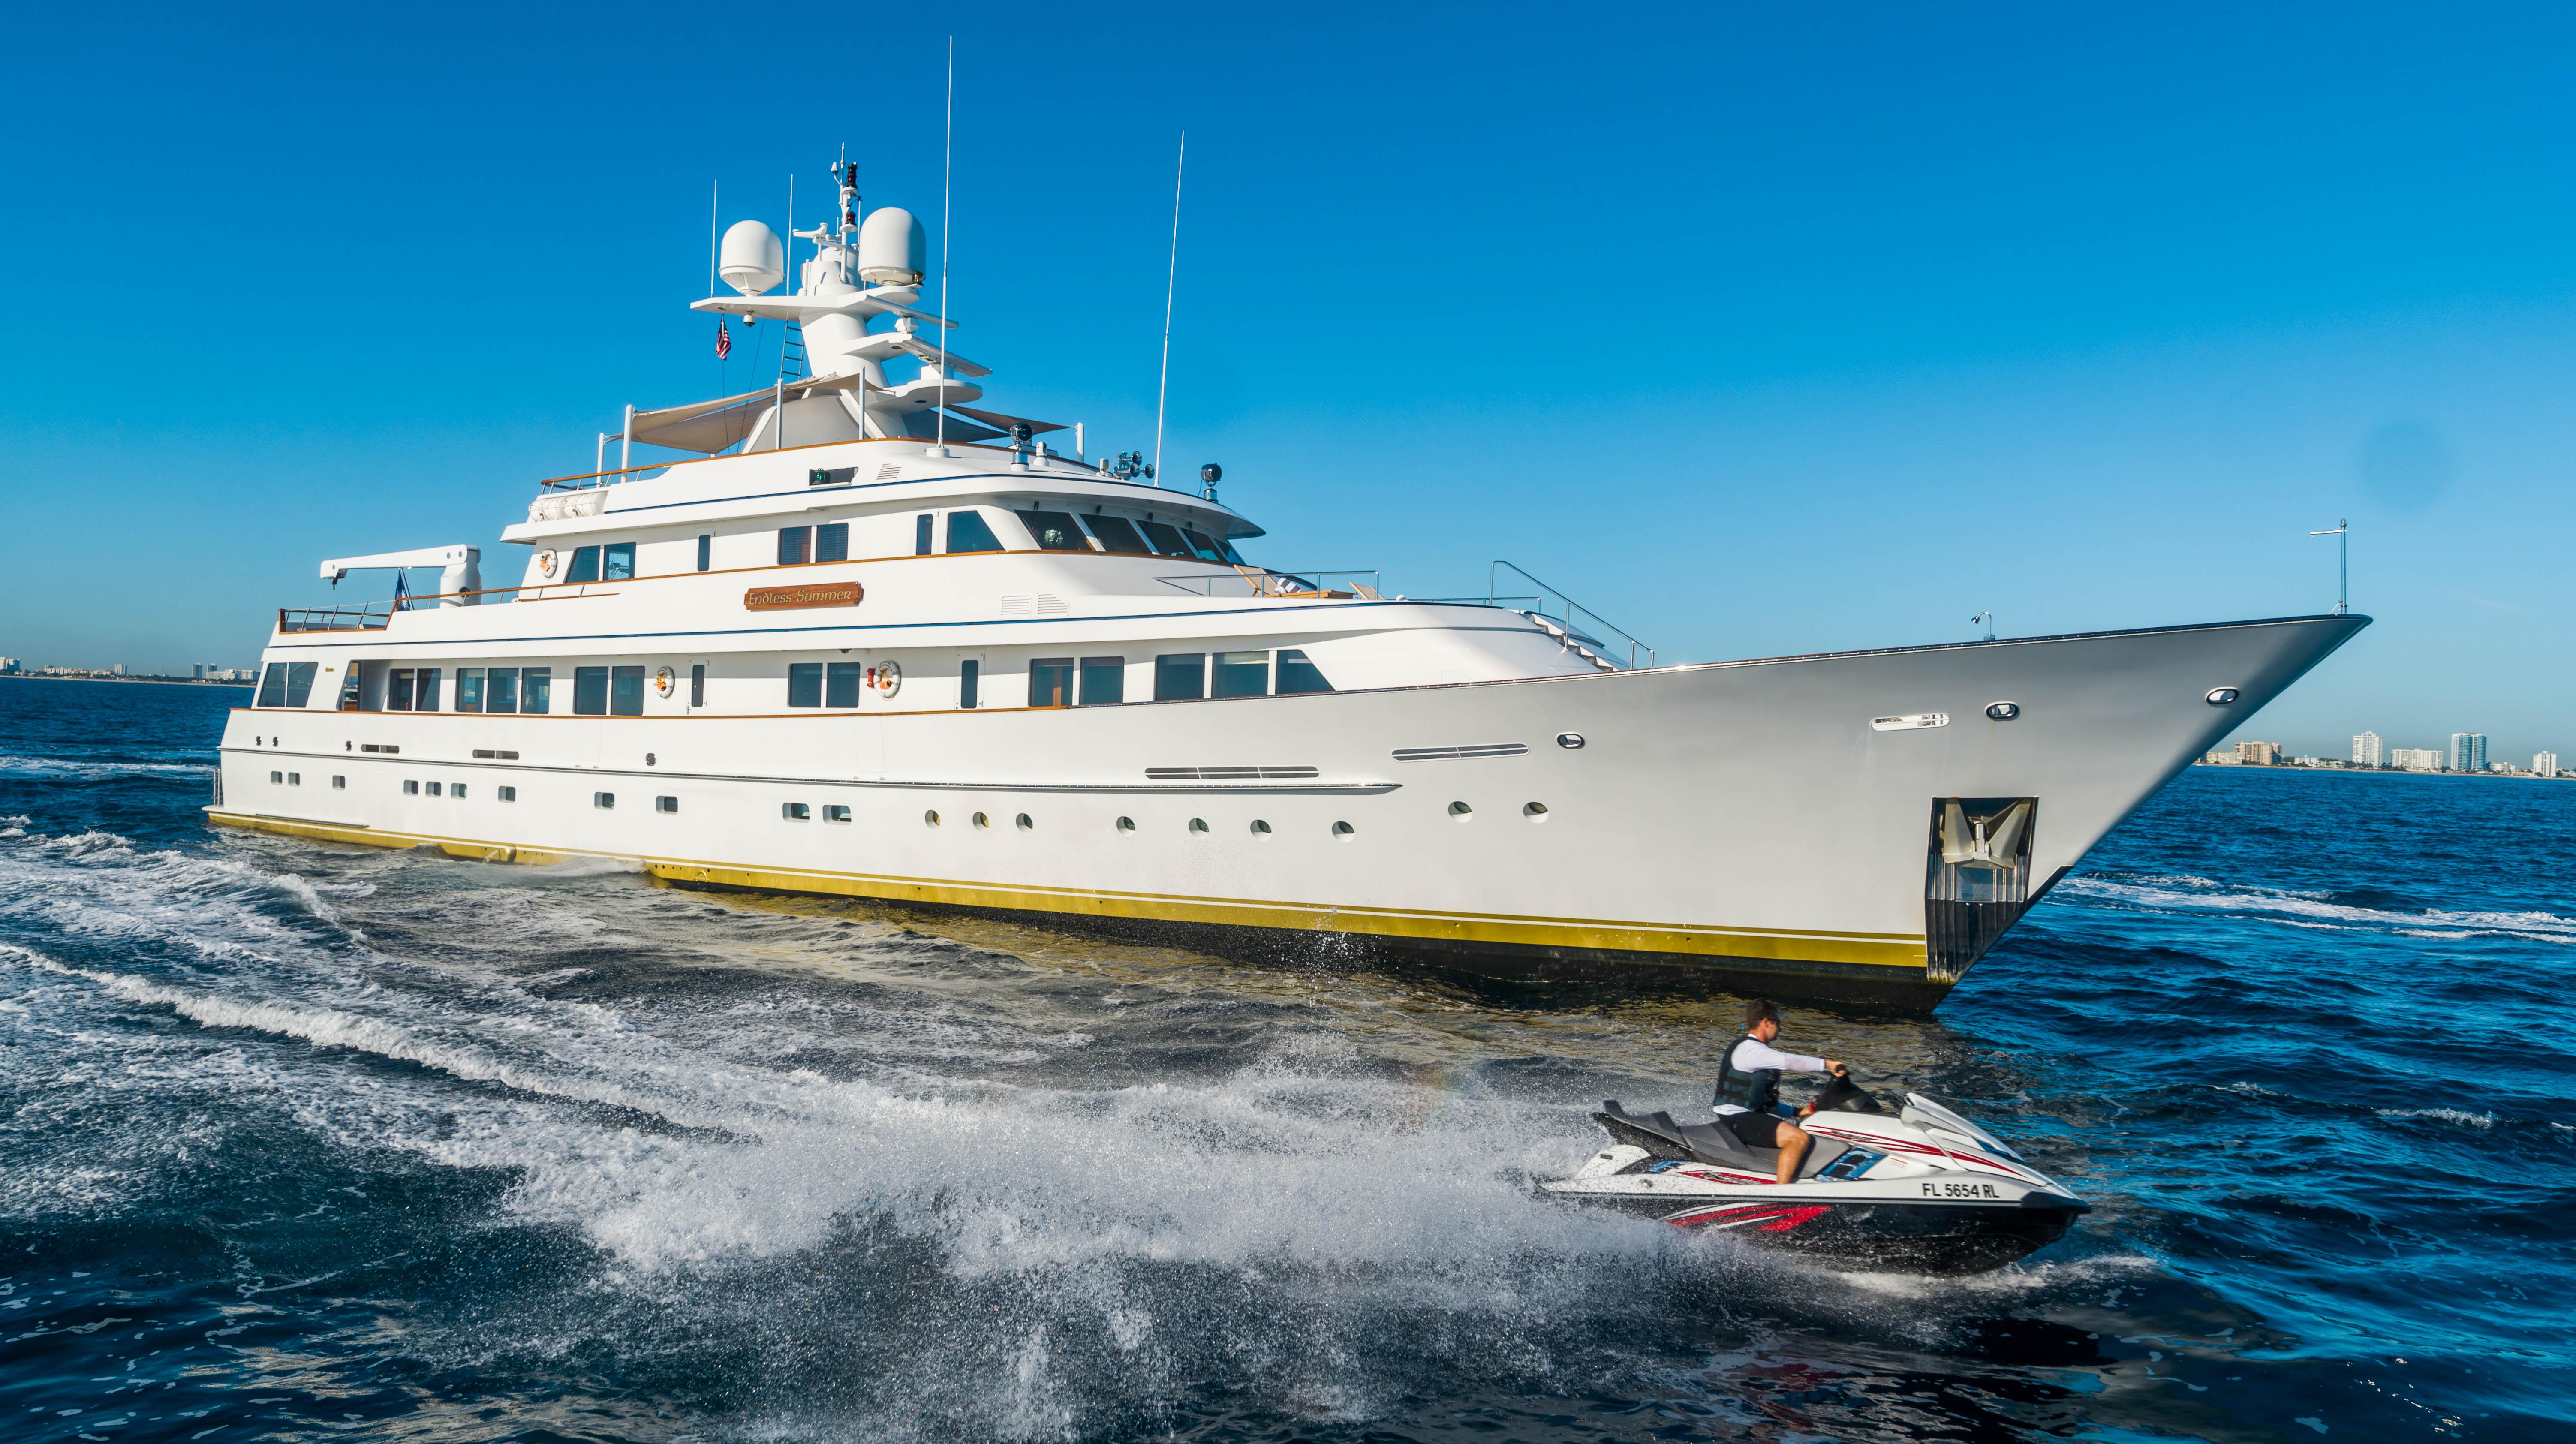 ENDLESS SUMMER Yacht for Sale is a 156' Feadship Motor Yacht